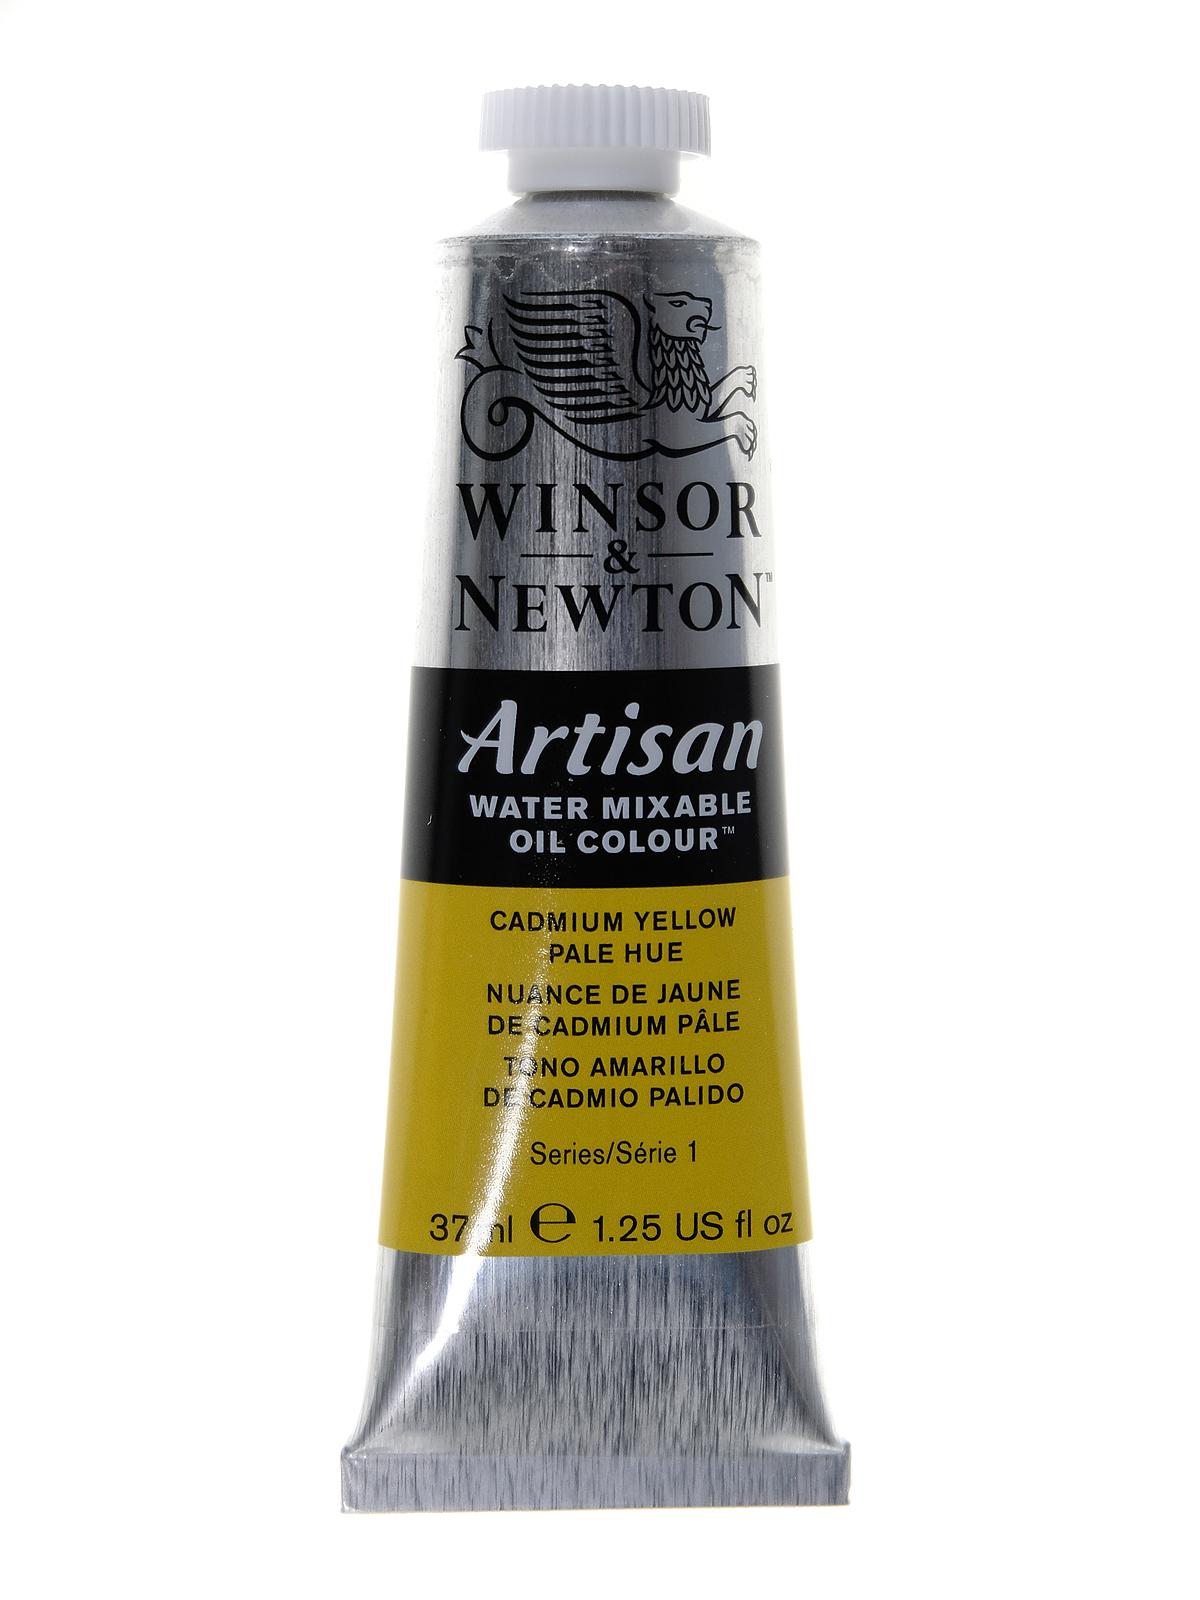 Artisan Water Mixable Oil Colours Cadmium Yellow Pale Hue 37 Ml 119